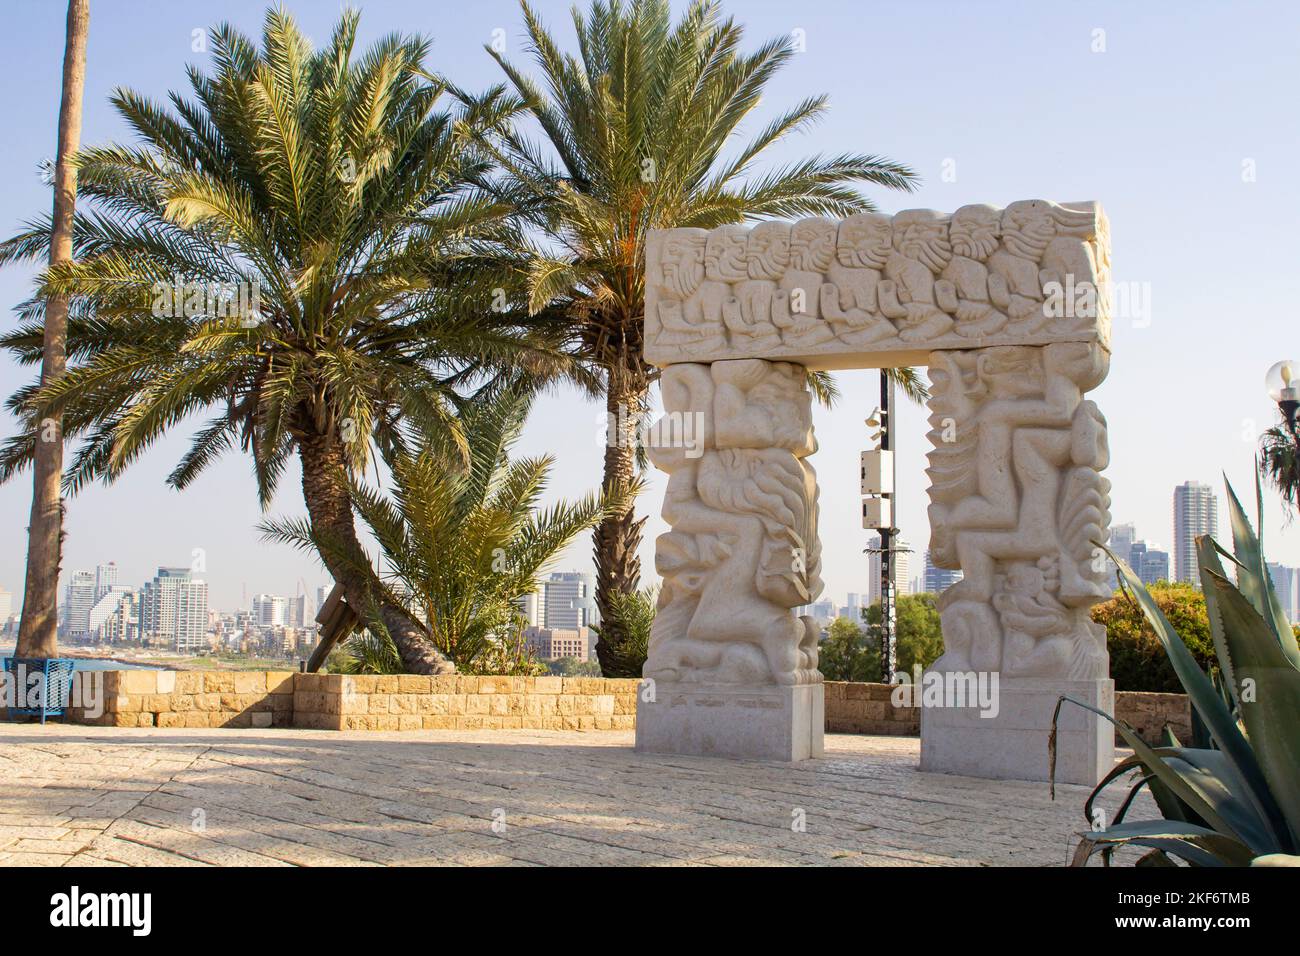 3 November 2022 The Gate of Faith monument standing in Peak Park in Old Jaffa Israel. The statue consists of 2 4 metre sculpted pillars upon which res Stock Photo